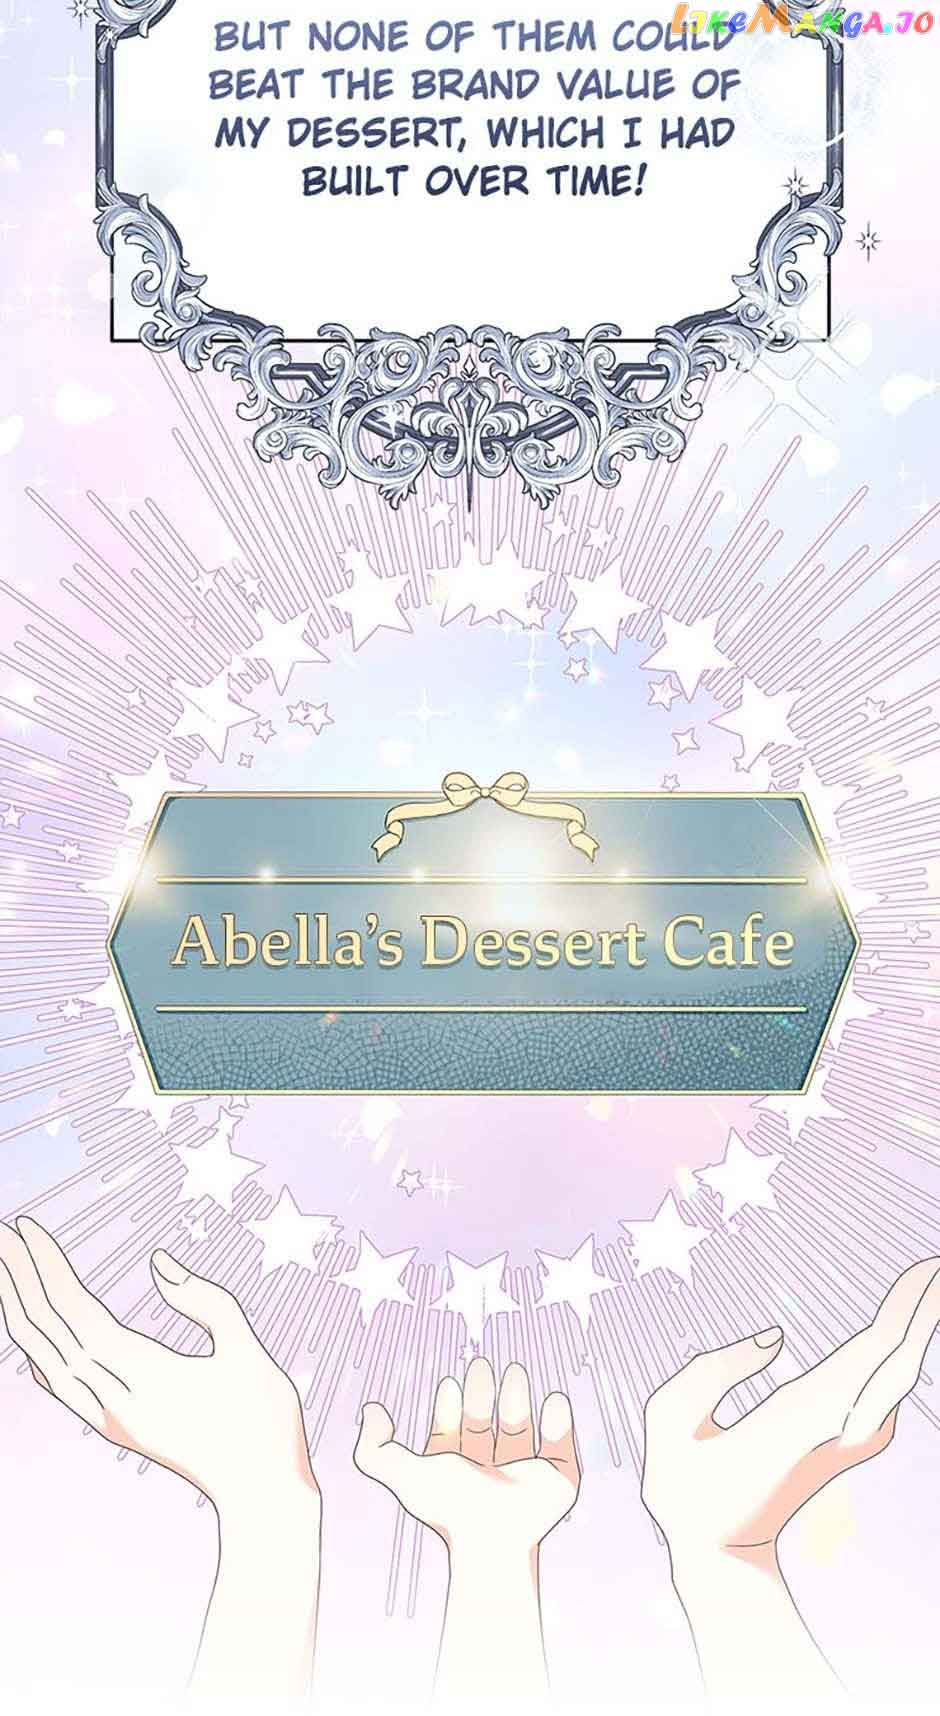 She came back and opened a dessert shop chapter 80